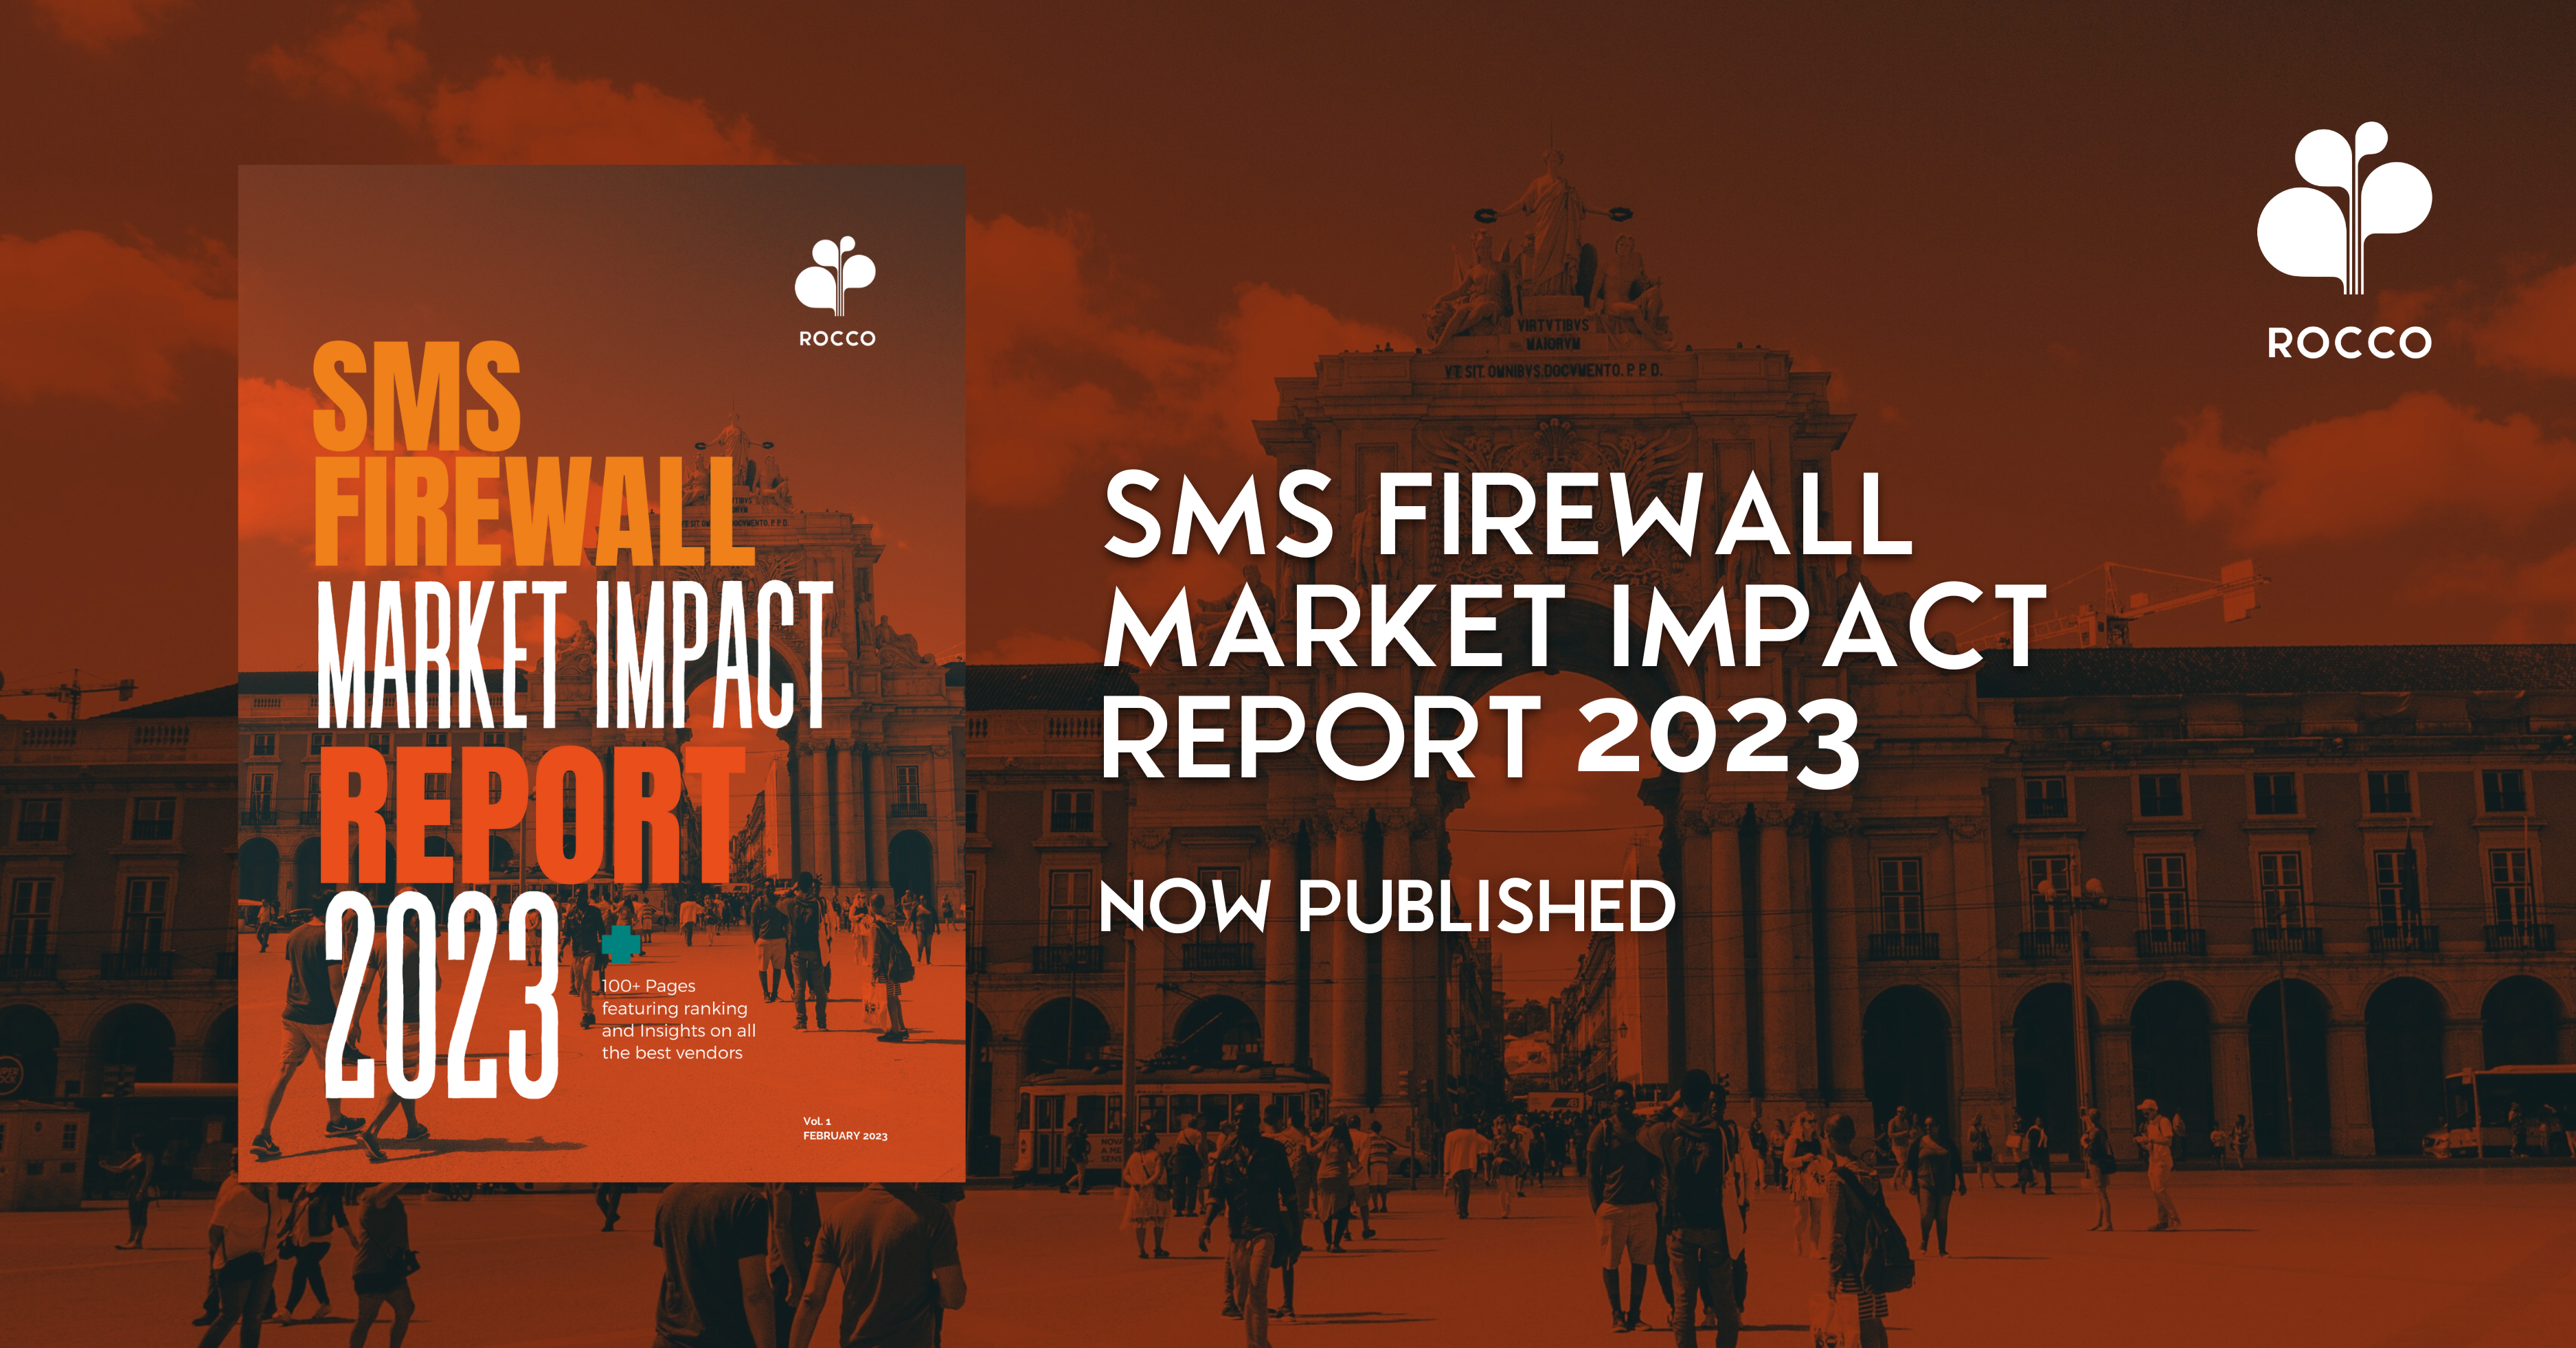 New SMS Firewall Market Impact Report 2023